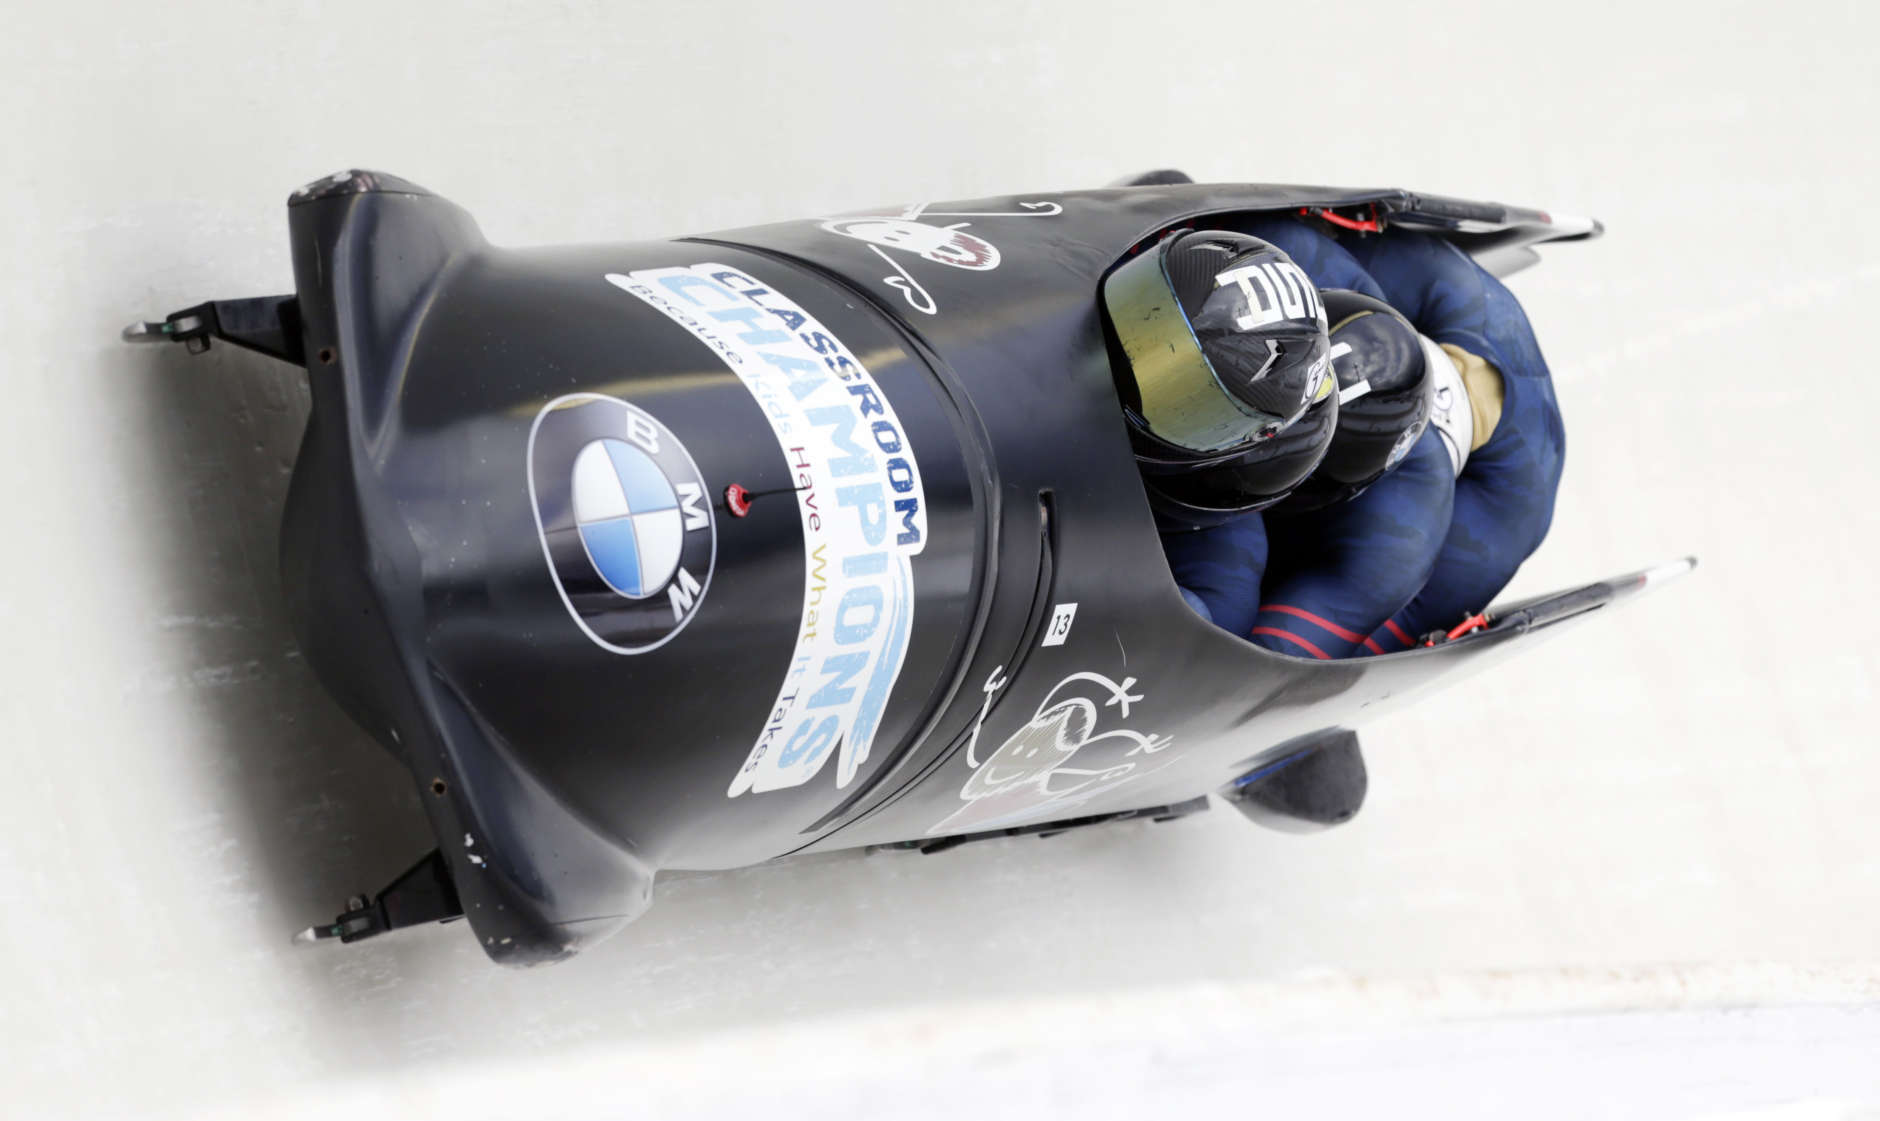 Driver Codie Bascue with David Cremin, Nathan Gilsleider and brakeman Hakeem Abdul-Saboor compete in the four-man bobsled World Cup race on Saturday, Jan. 9, 2016, in Lake Placid, N.Y. (AP Photo/Mike Groll)